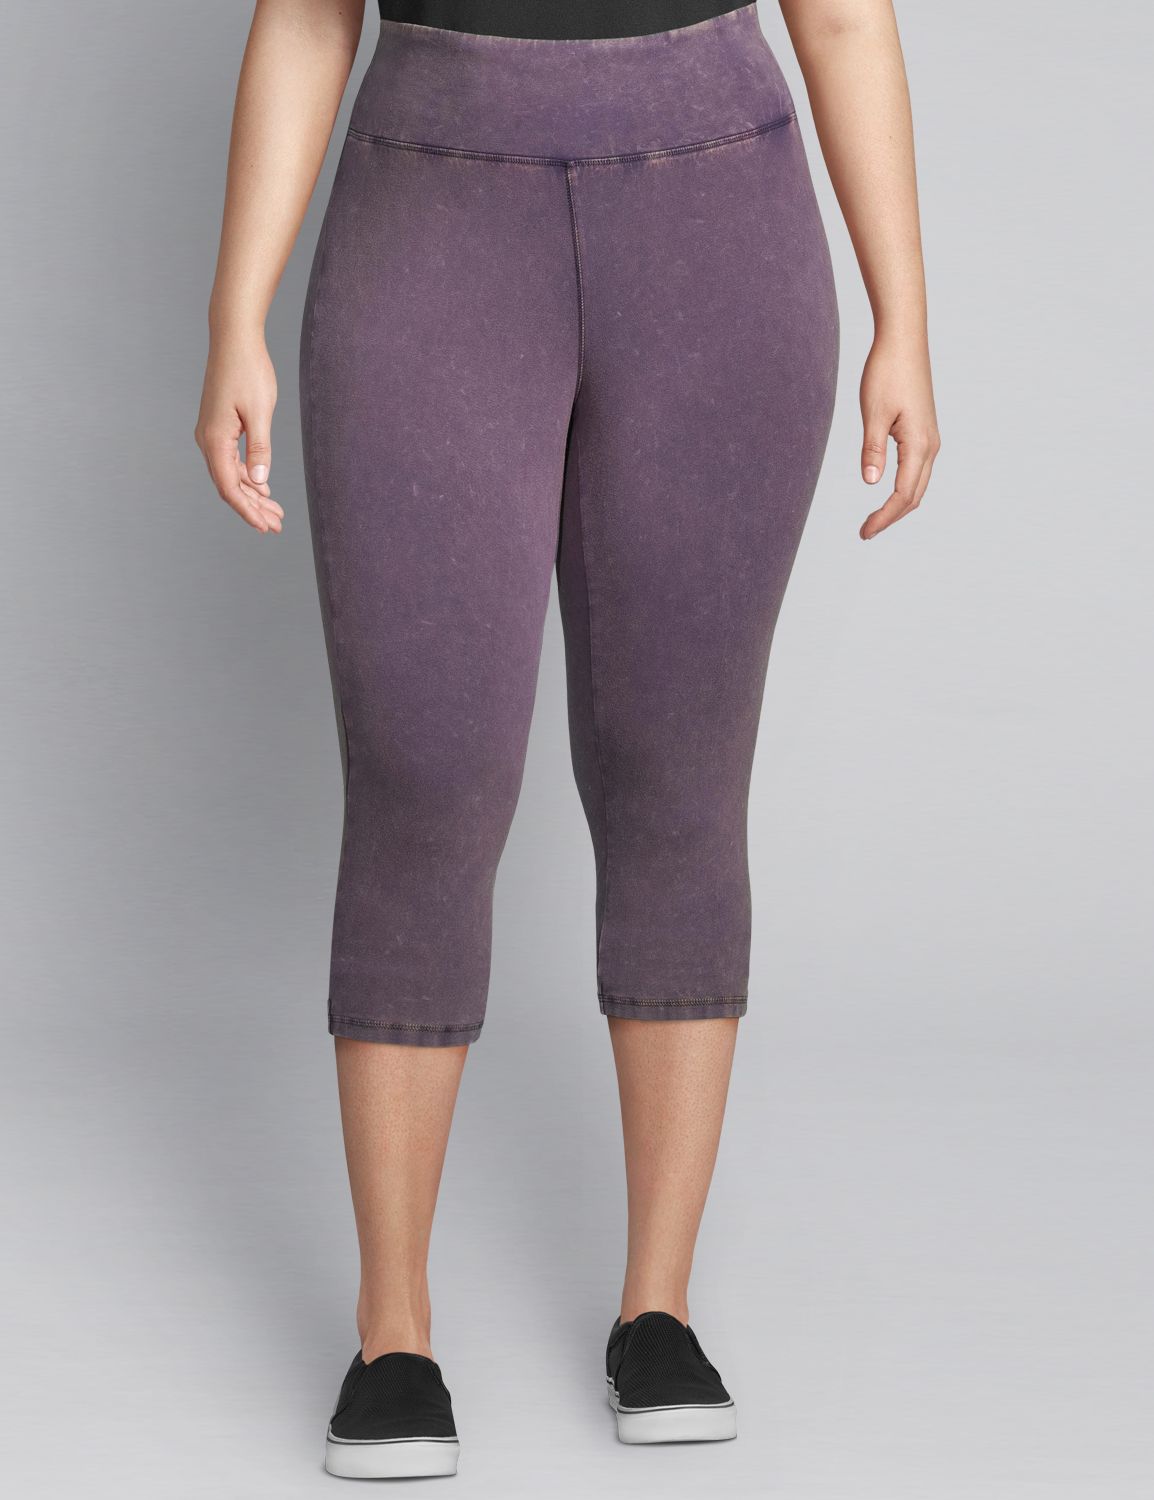 Clearance Plus Size Activewear 